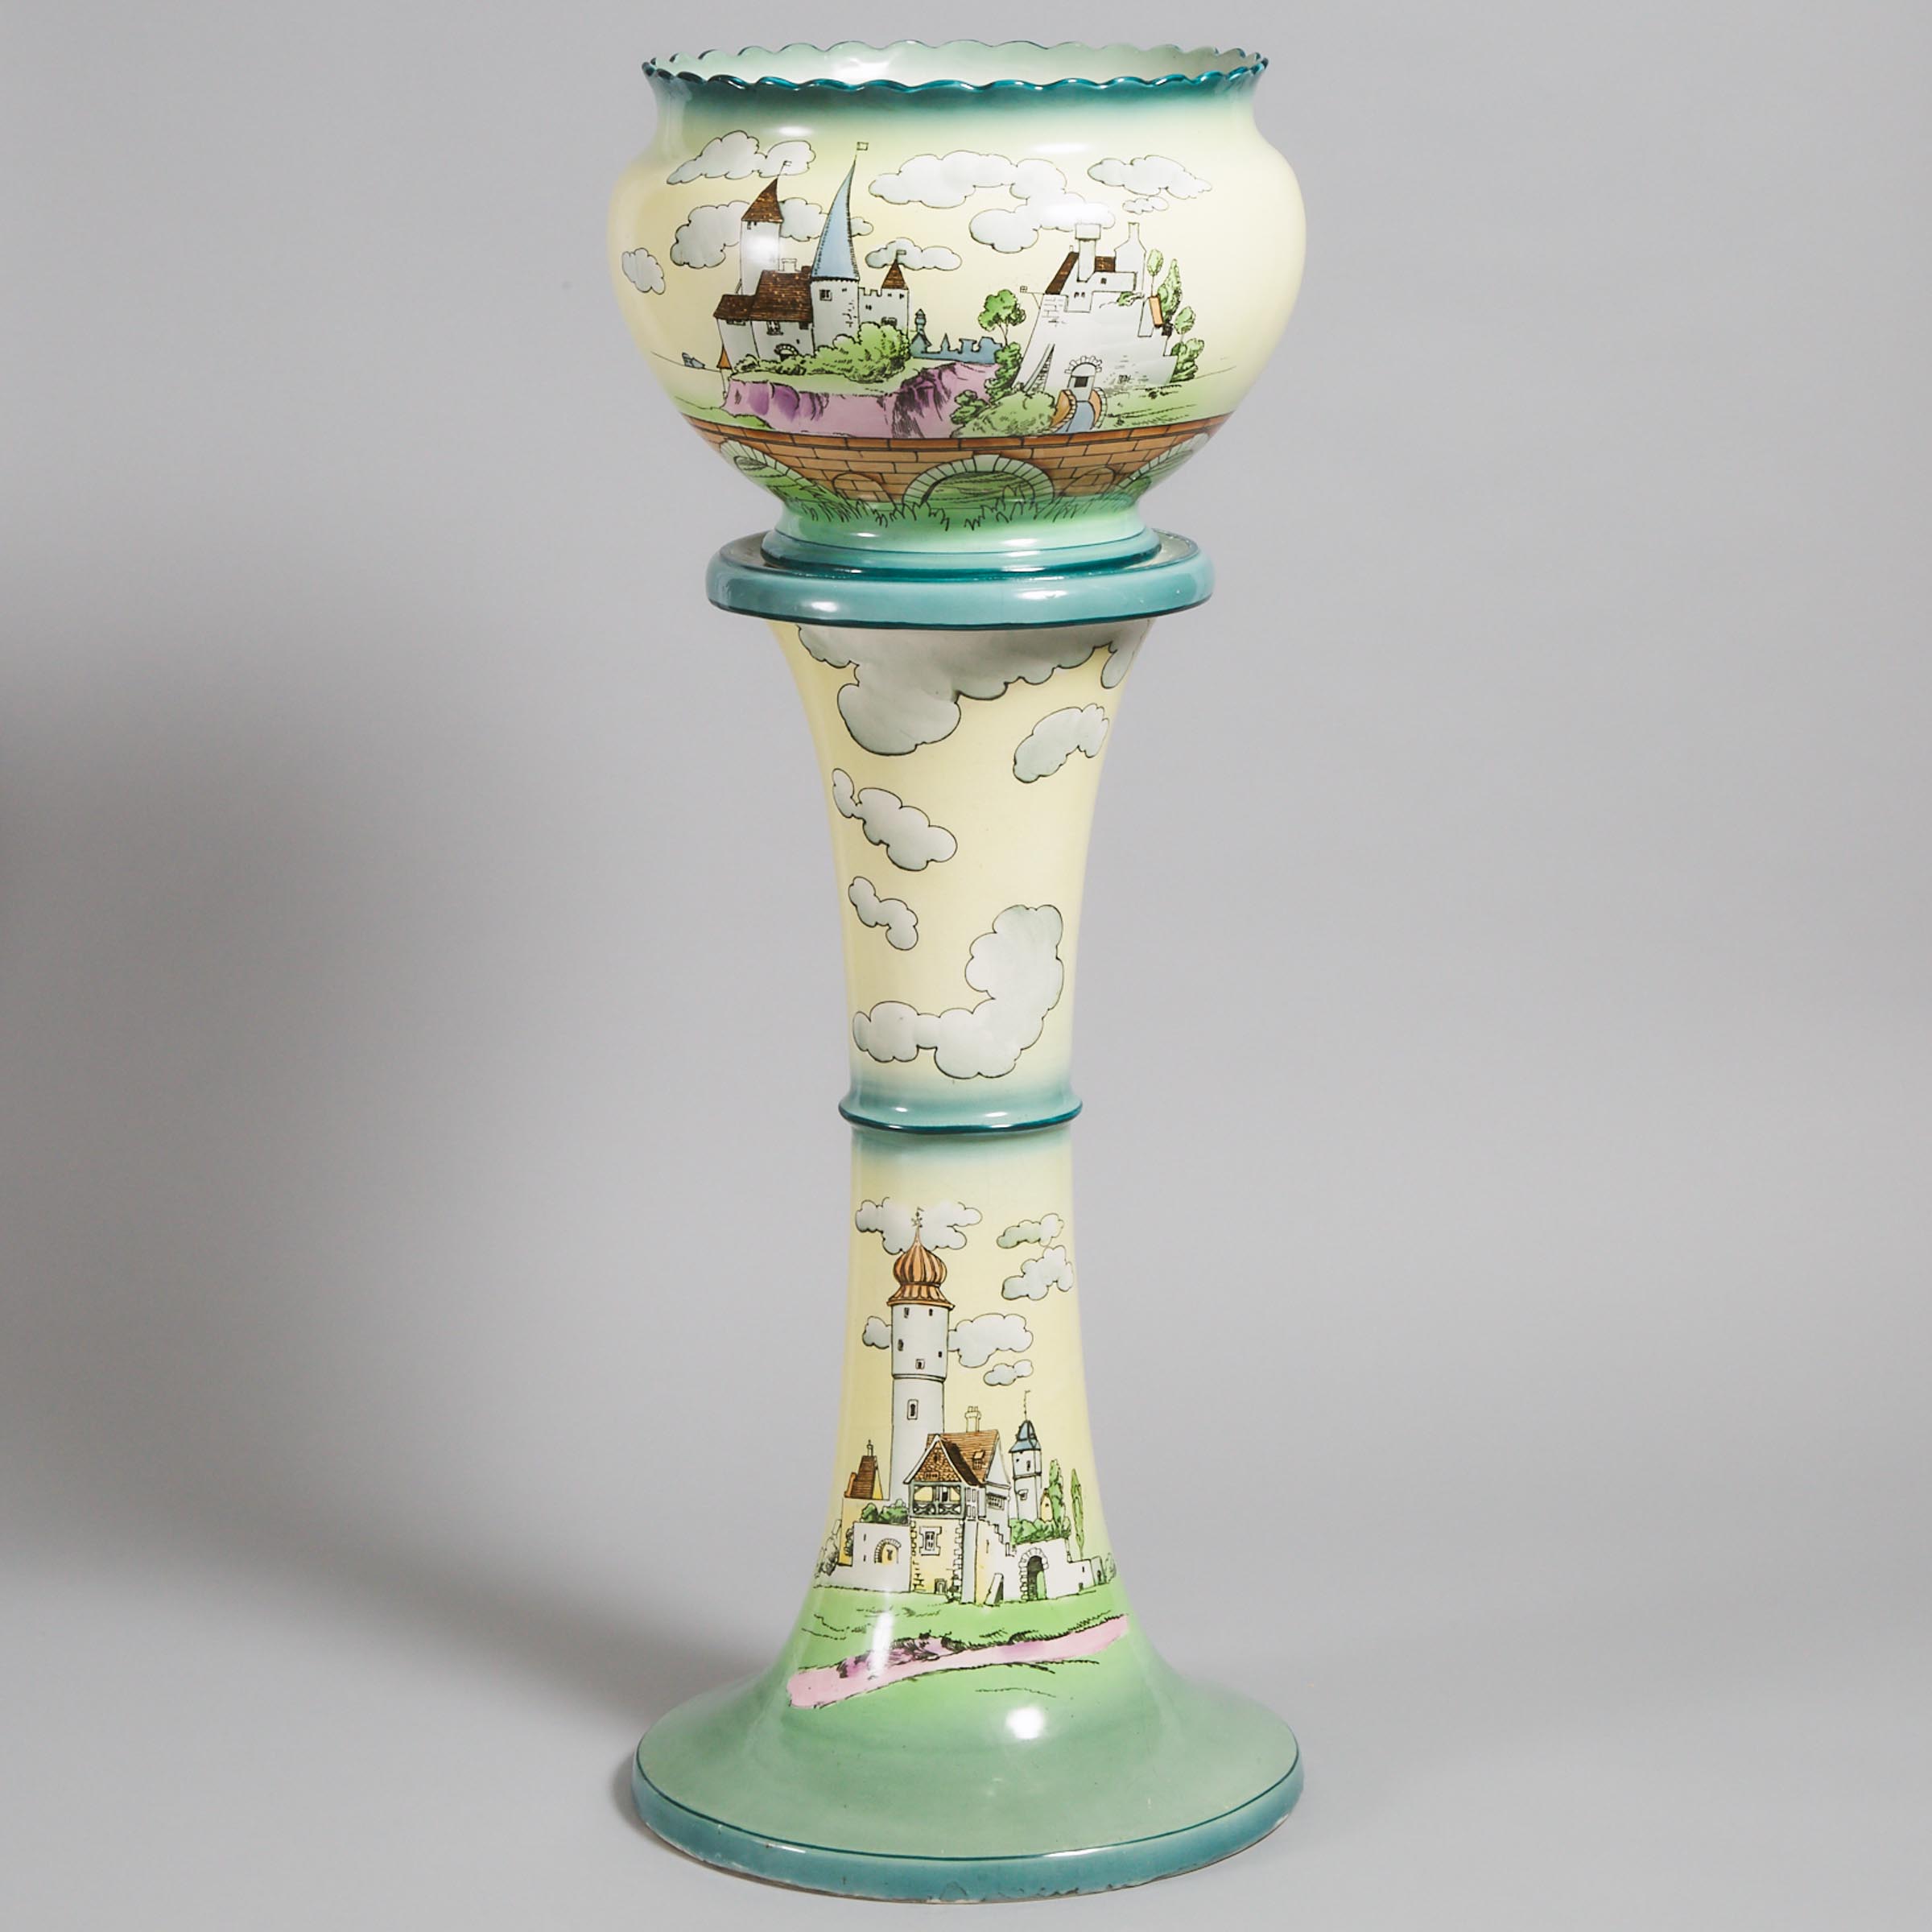 English Earthenware 'Storybook' Jardinière on Stand, c.1920